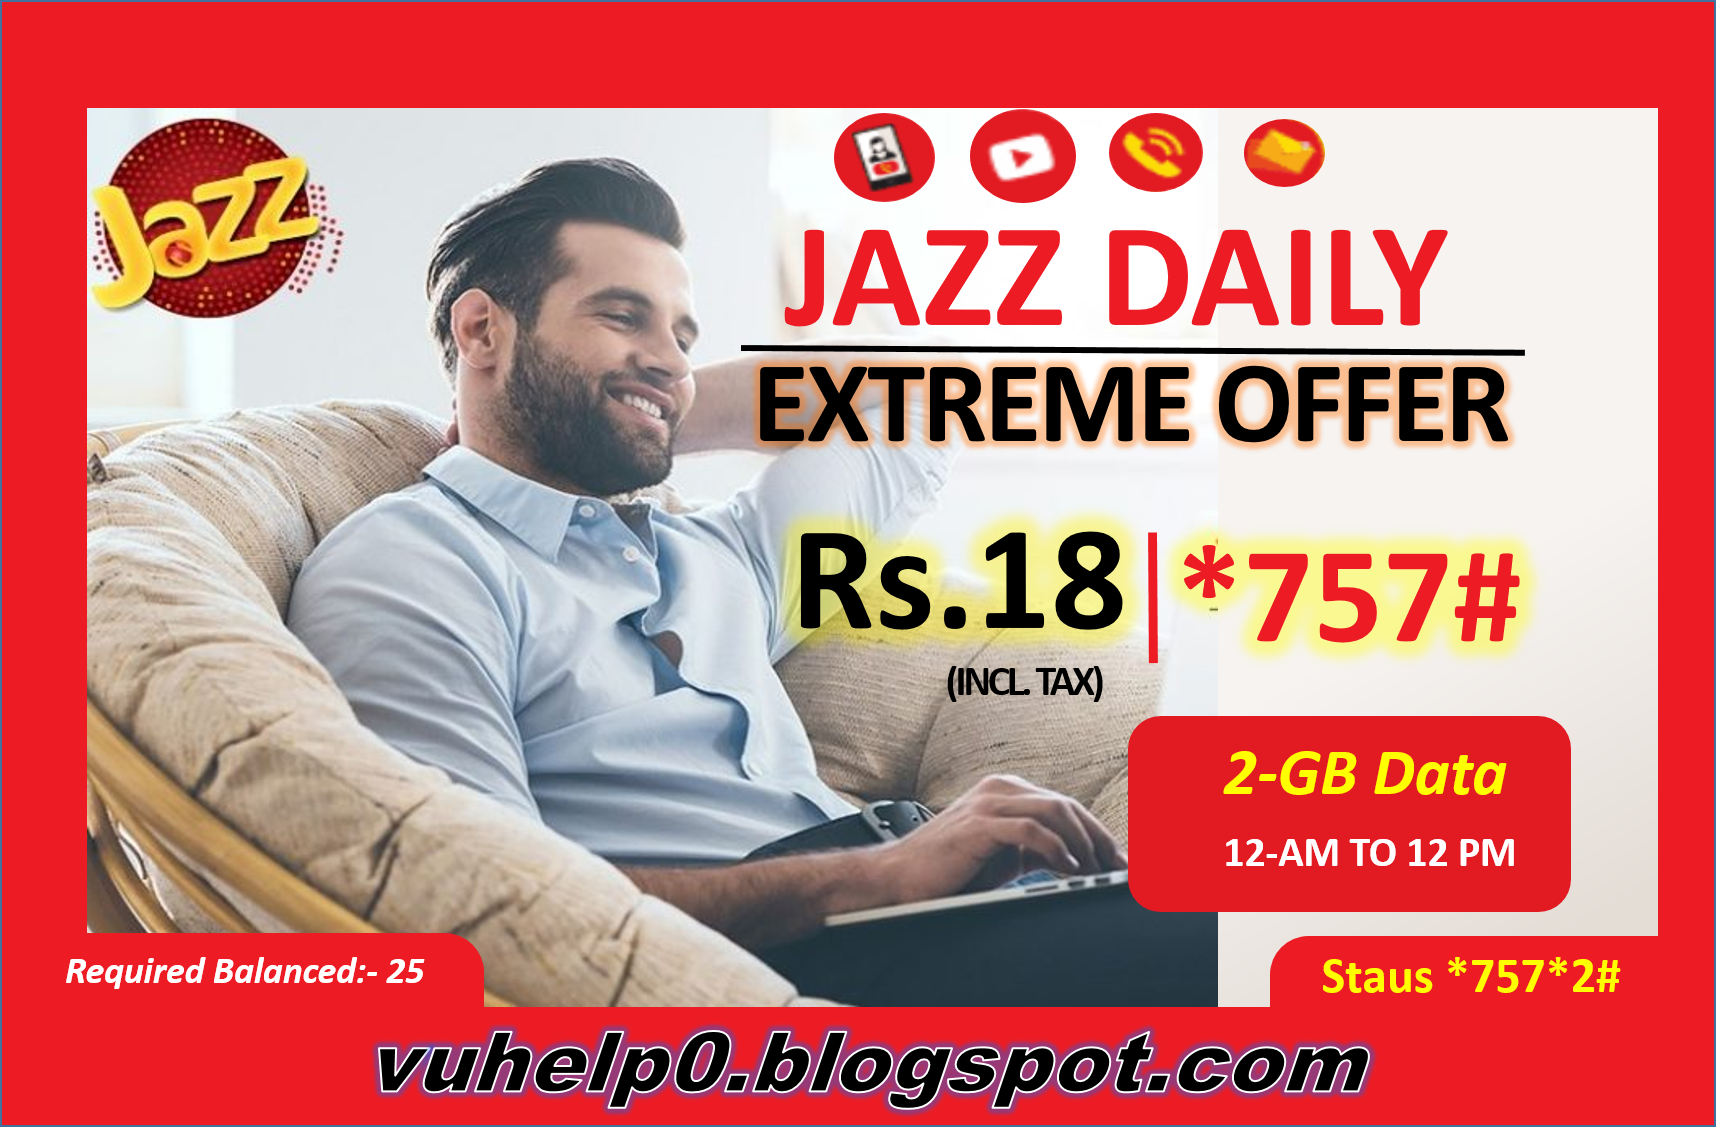 Jazz Daily Extreme Offer | Jazz *757# Offer